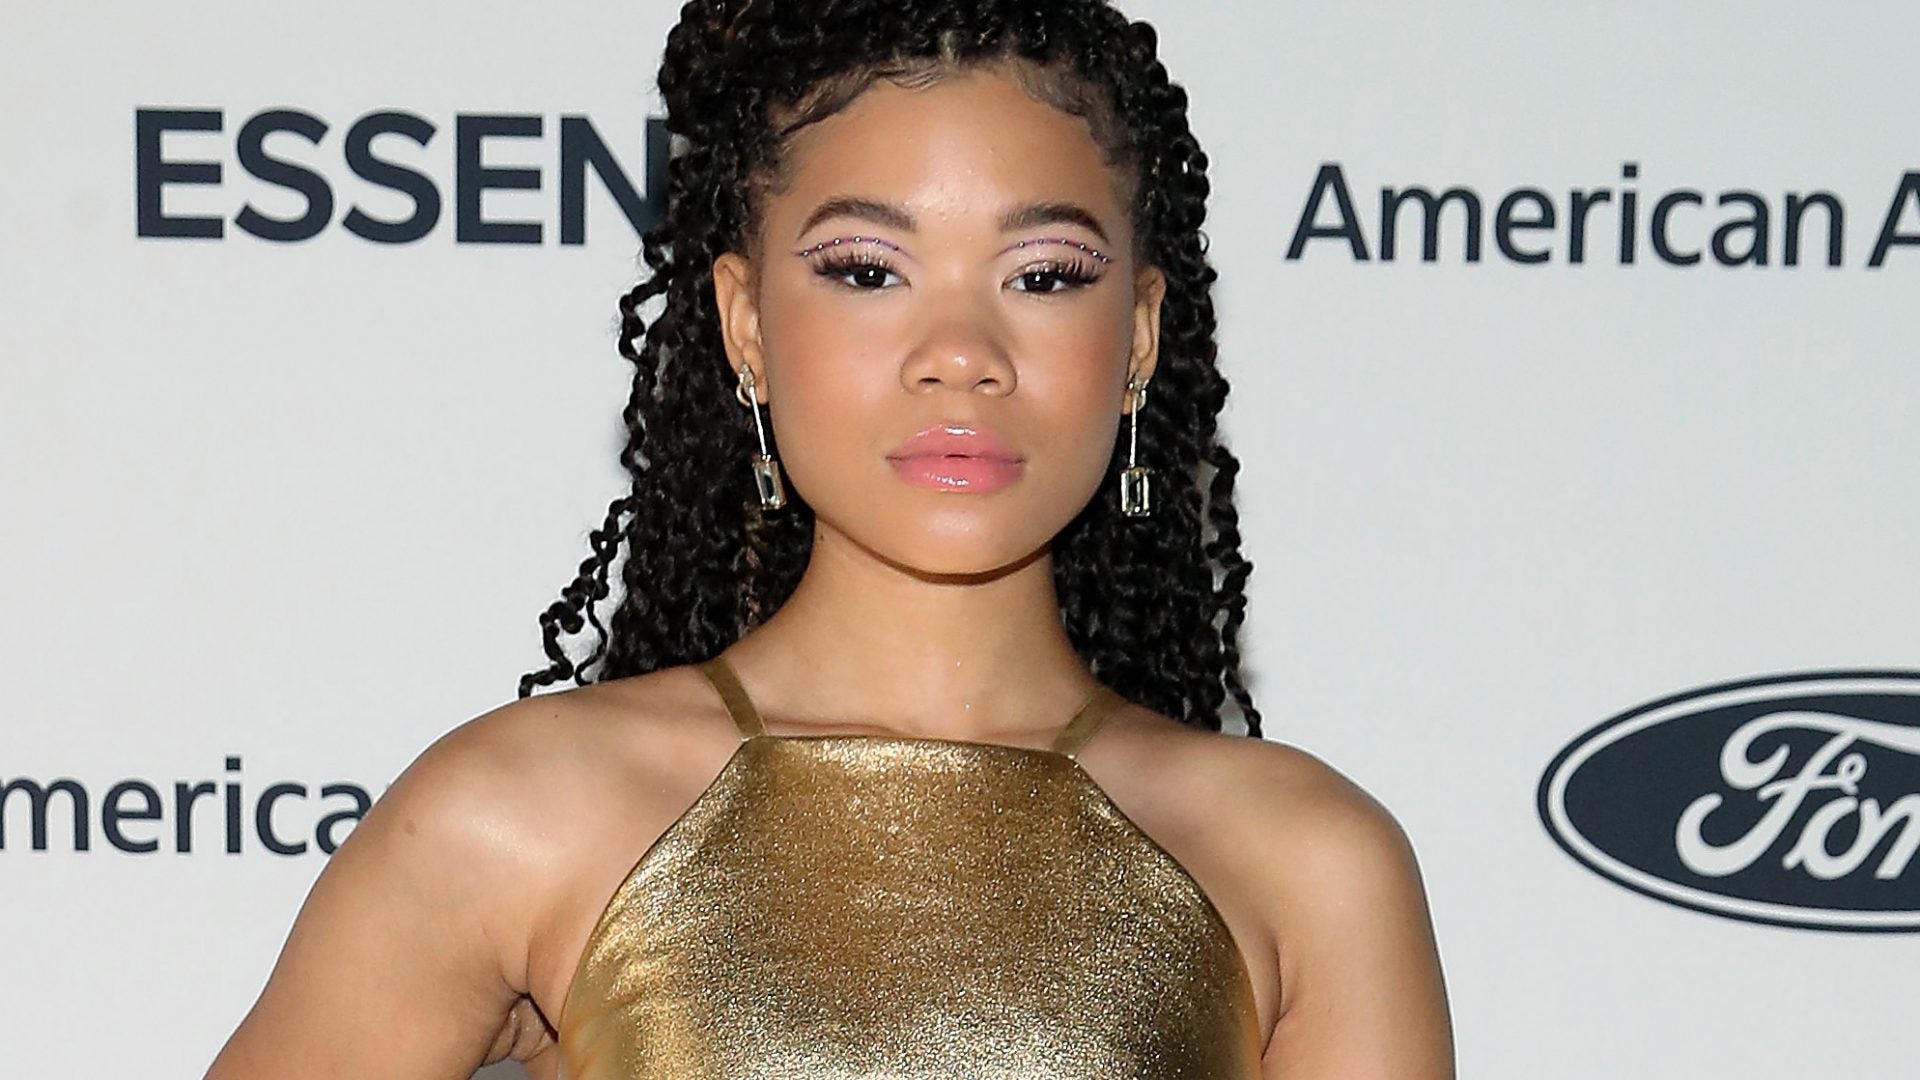 Storm Reid Was A Golden Goddess In This Custom Prada Look On The ESSENCE Red Carpet